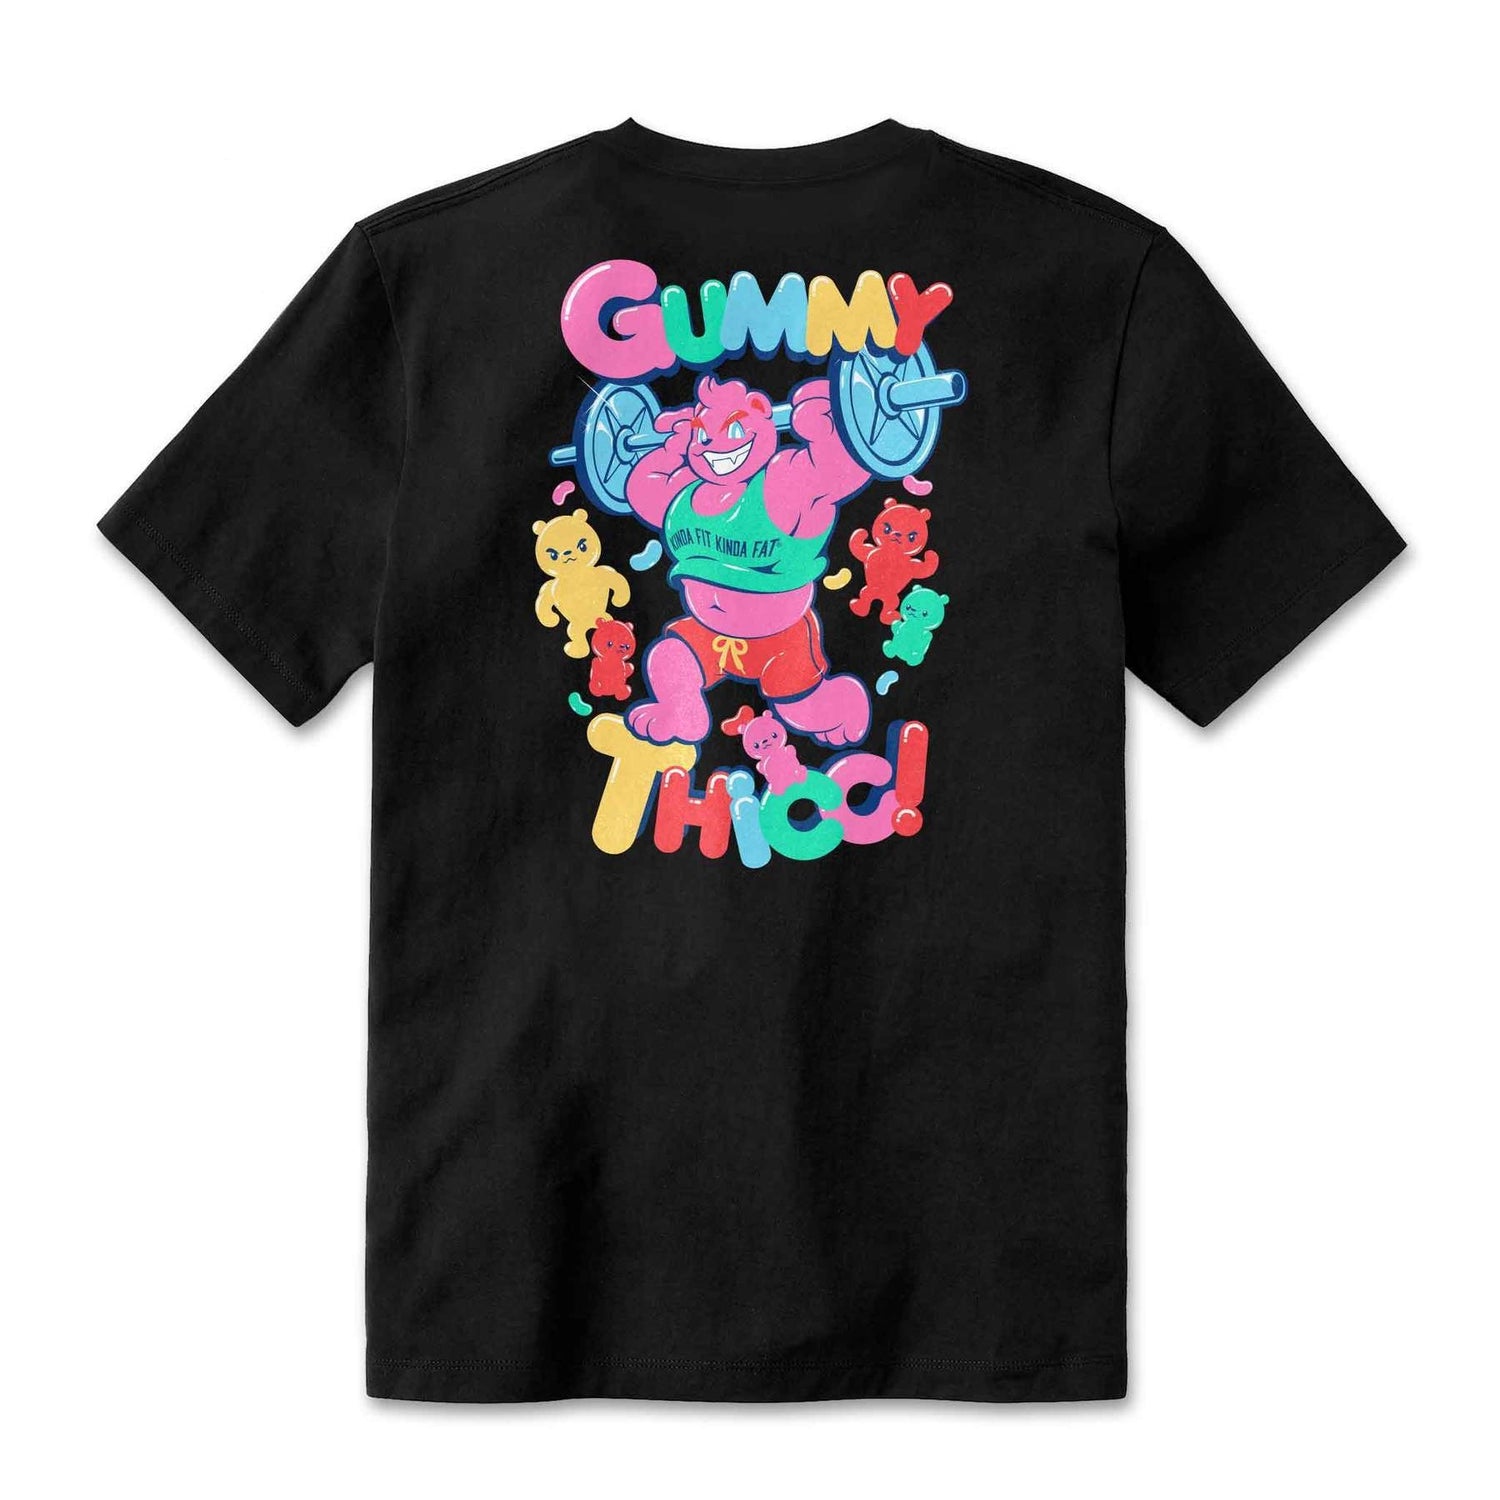 Kinda Fit Kinda Fat Gummy Thicc Tee - 9 for 9